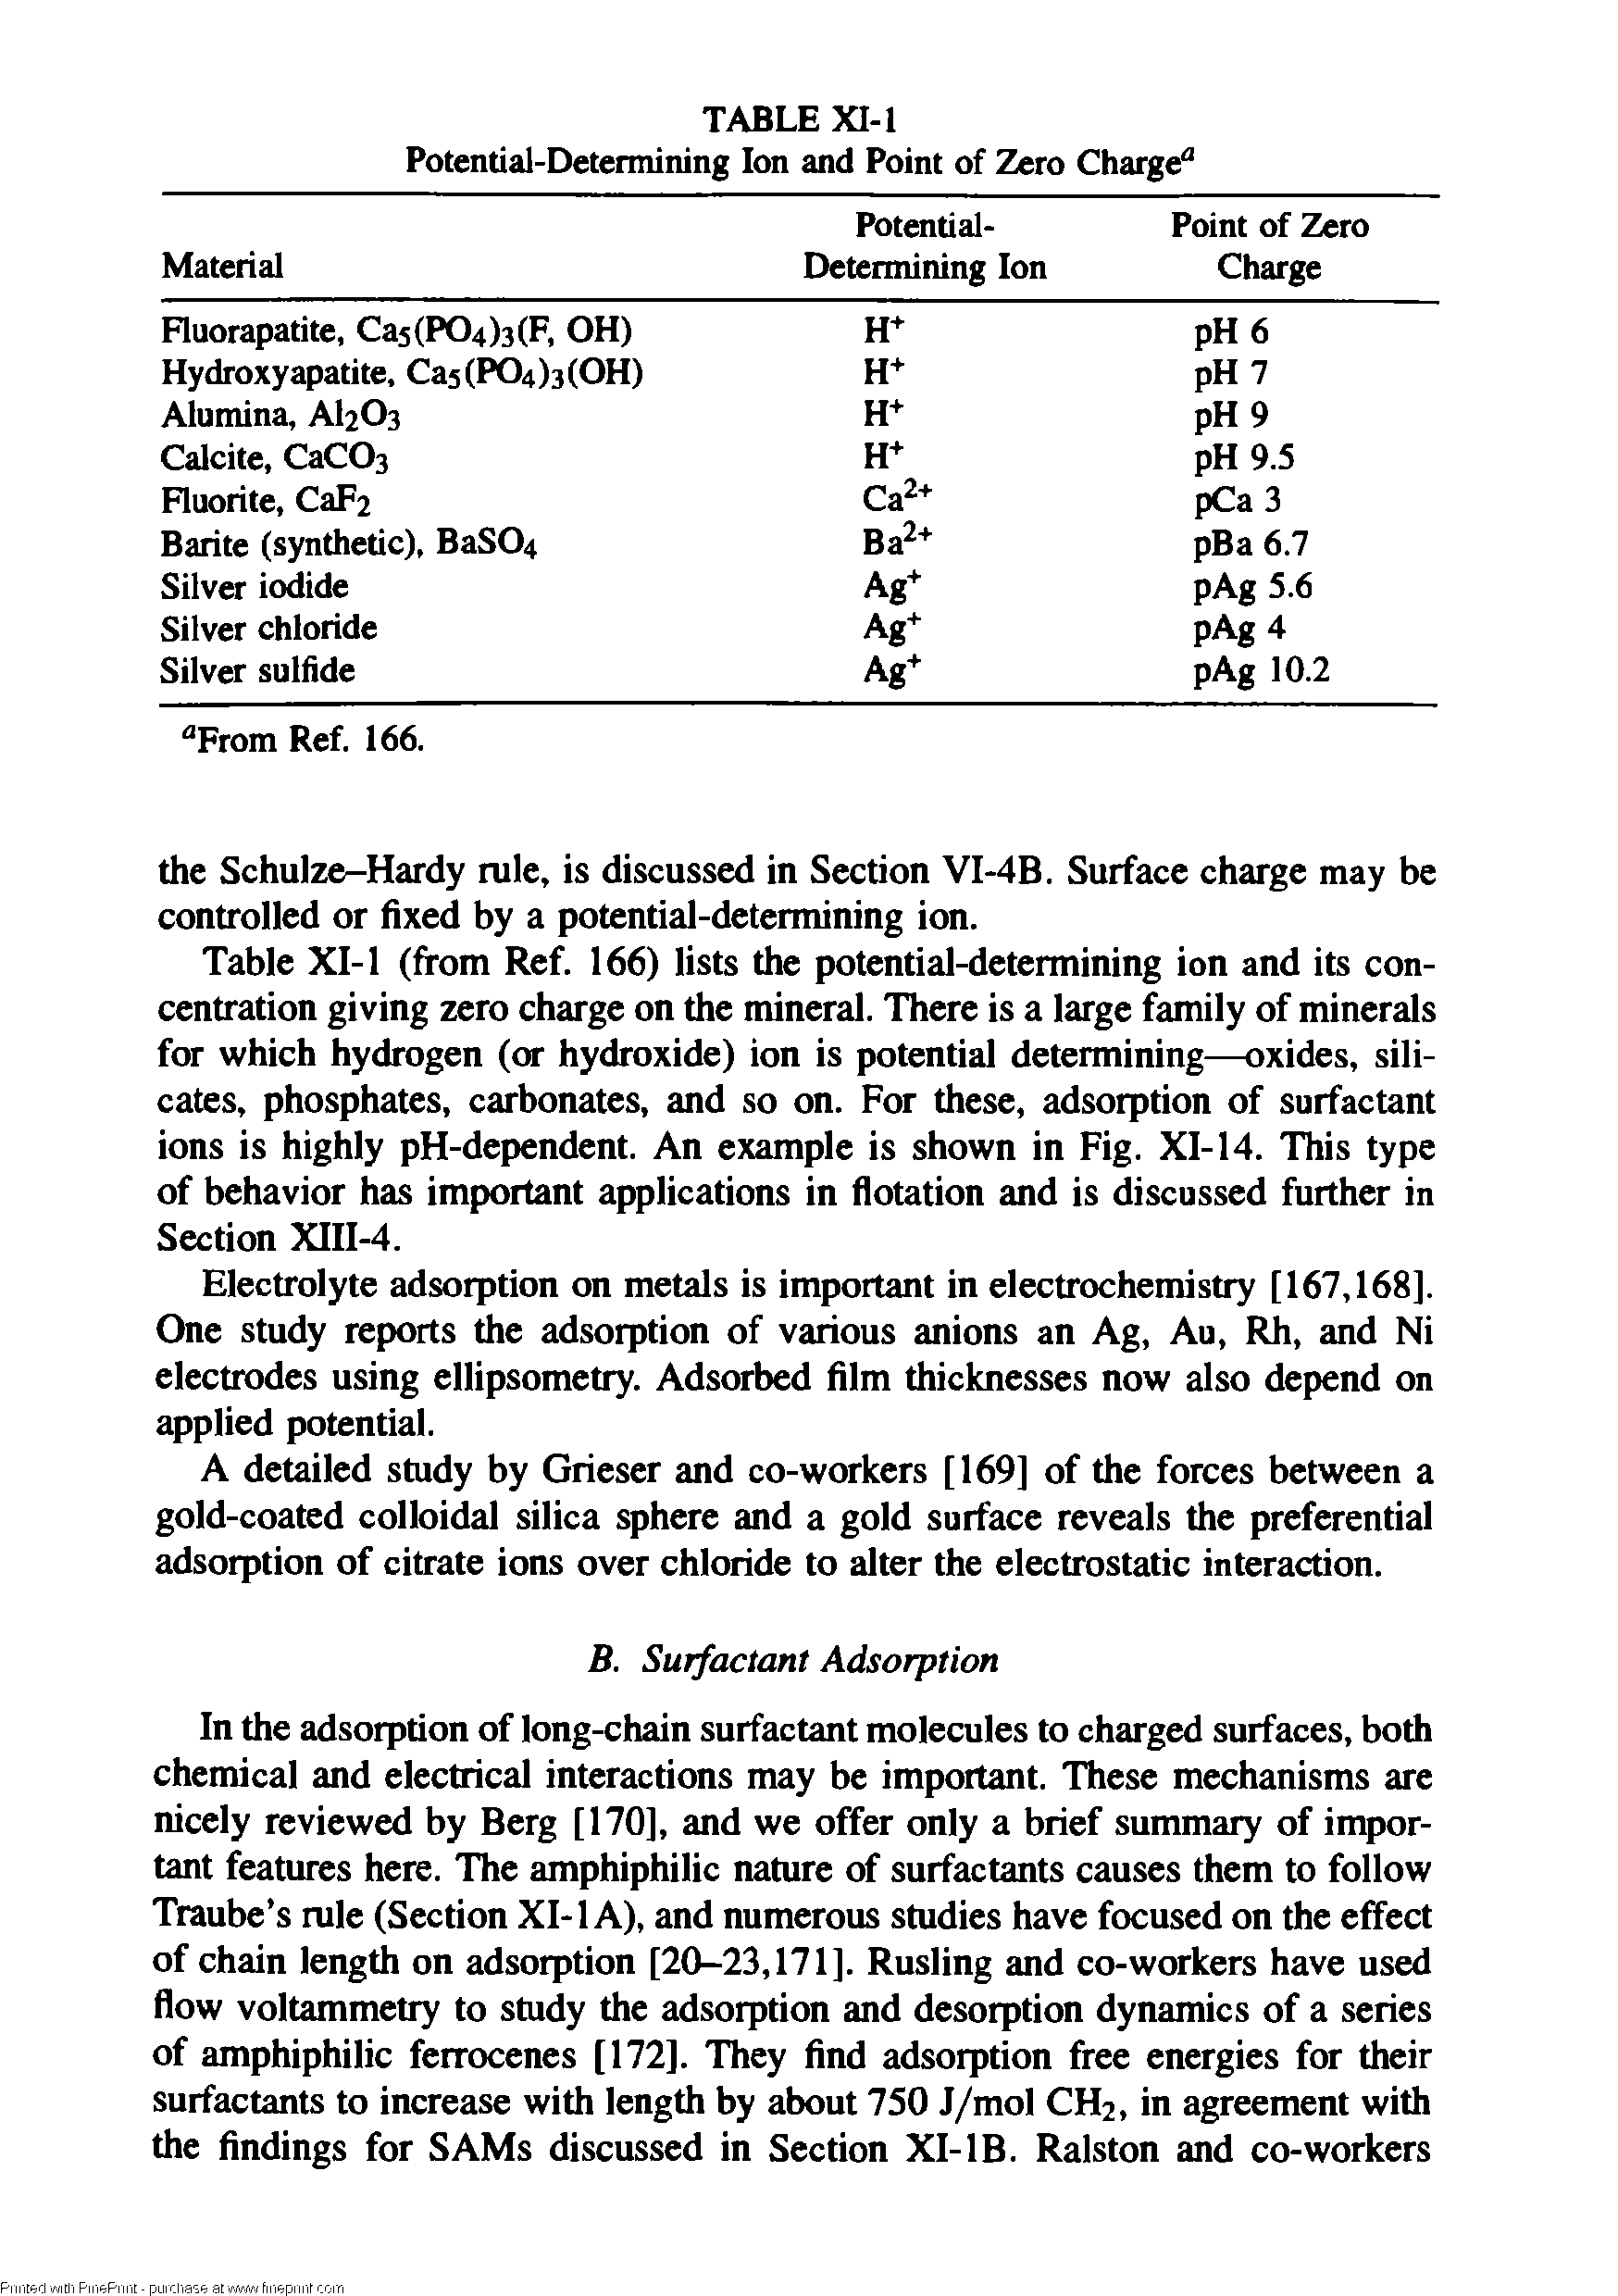 Table XI-1 (from Ref. 166) lists the potential-determining ion and its concentration giving zero charge on the mineral. There is a large family of minerals for which hydrogen (or hydroxide) ion is potential determining—oxides, silicates, phosphates, carbonates, and so on. For these, adsorption of surfactant ions is highly pH-dependent. An example is shown in Fig. XI-14. This type of behavior has important applications in flotation and is discussed further in Section XIII-4.